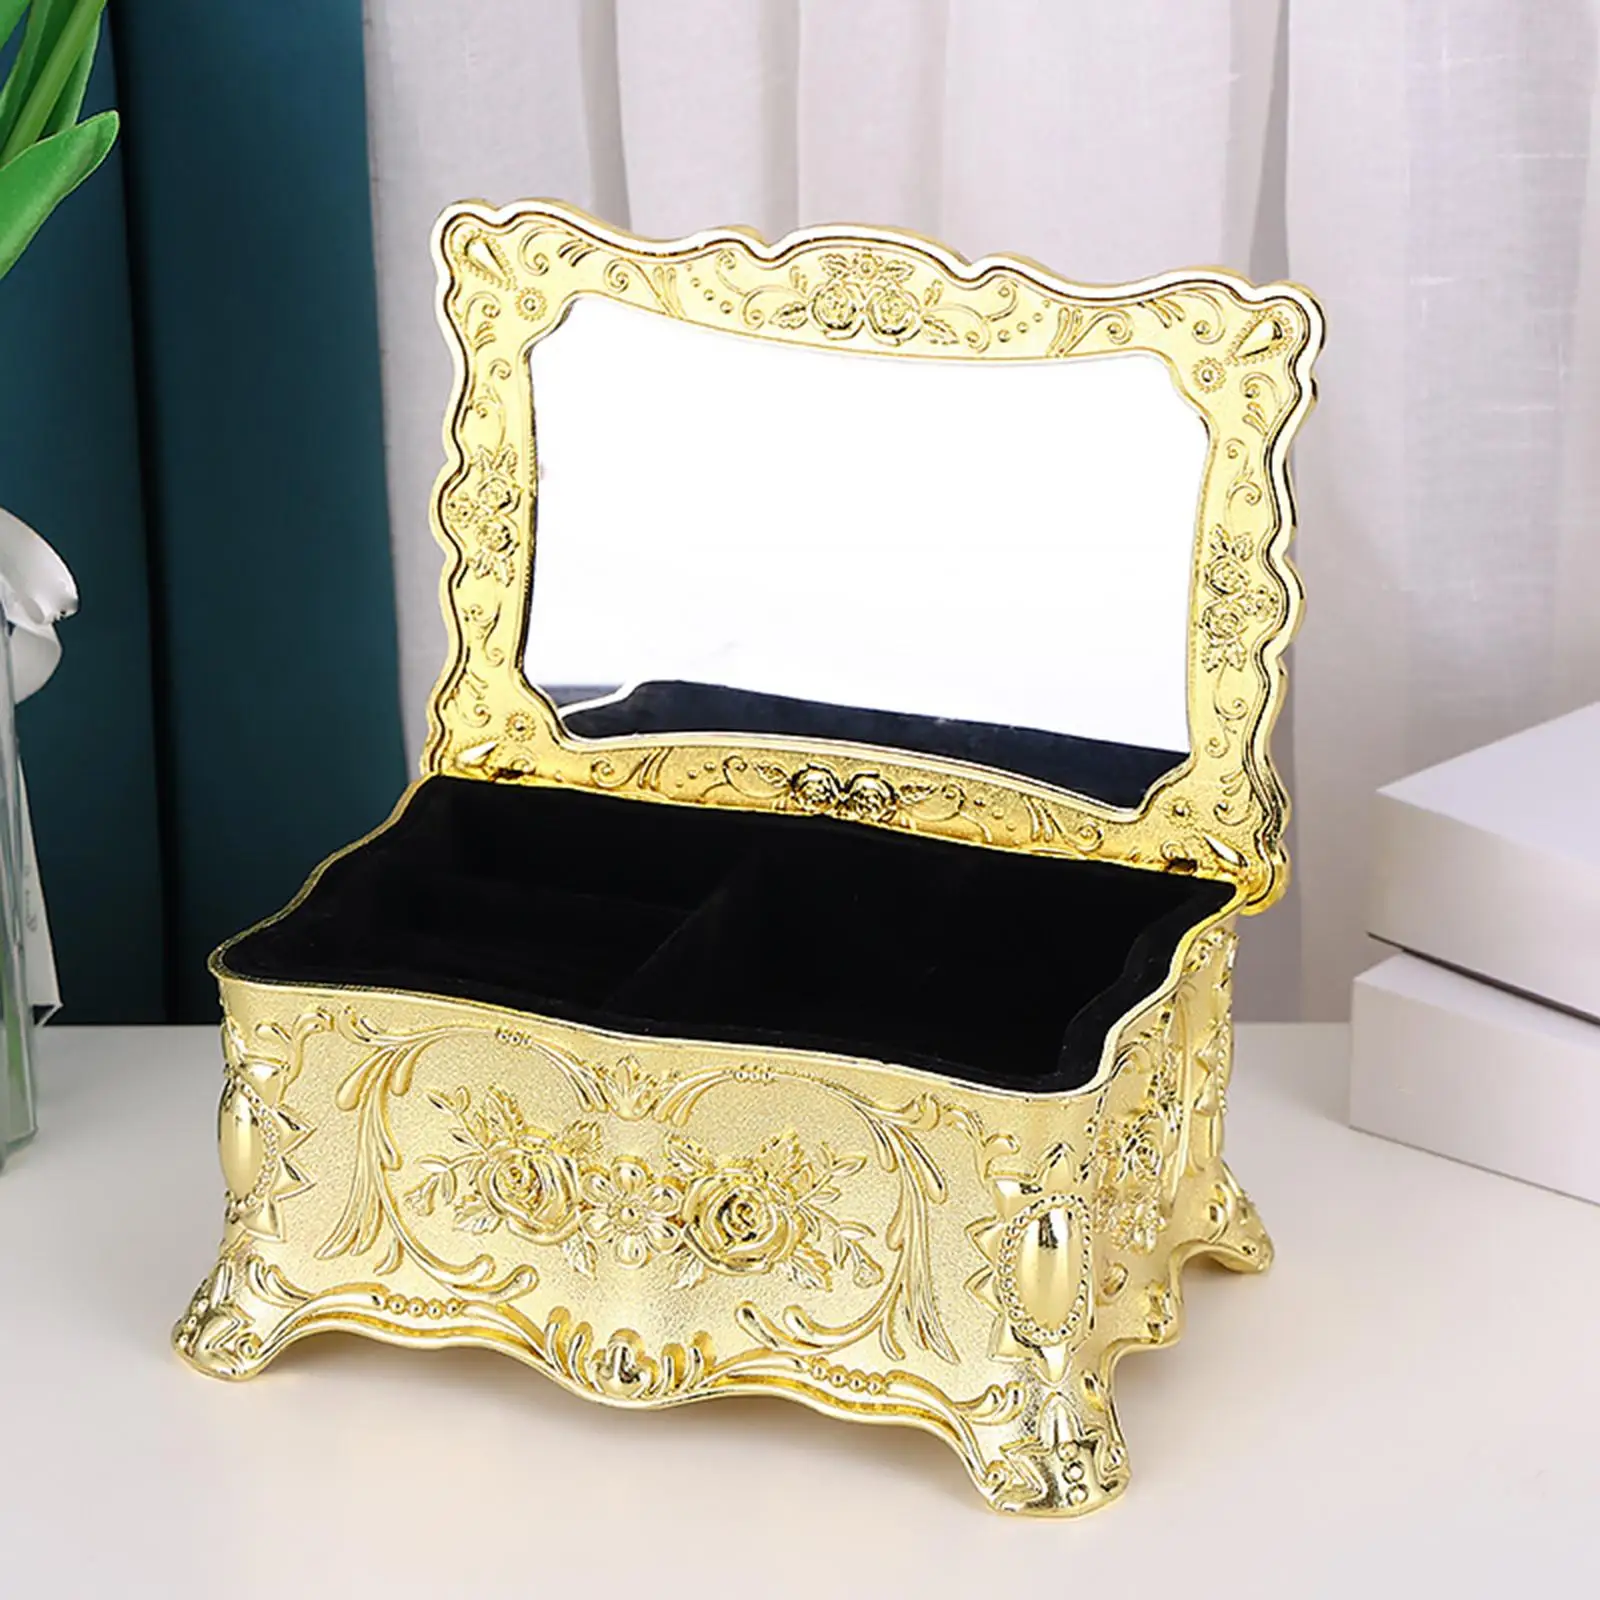 Jewelry Box Jewelry Storage Case for Women with Lid Treasure Chest Jewelry Holder Exquisite for Home Bedroom Desk Decoration